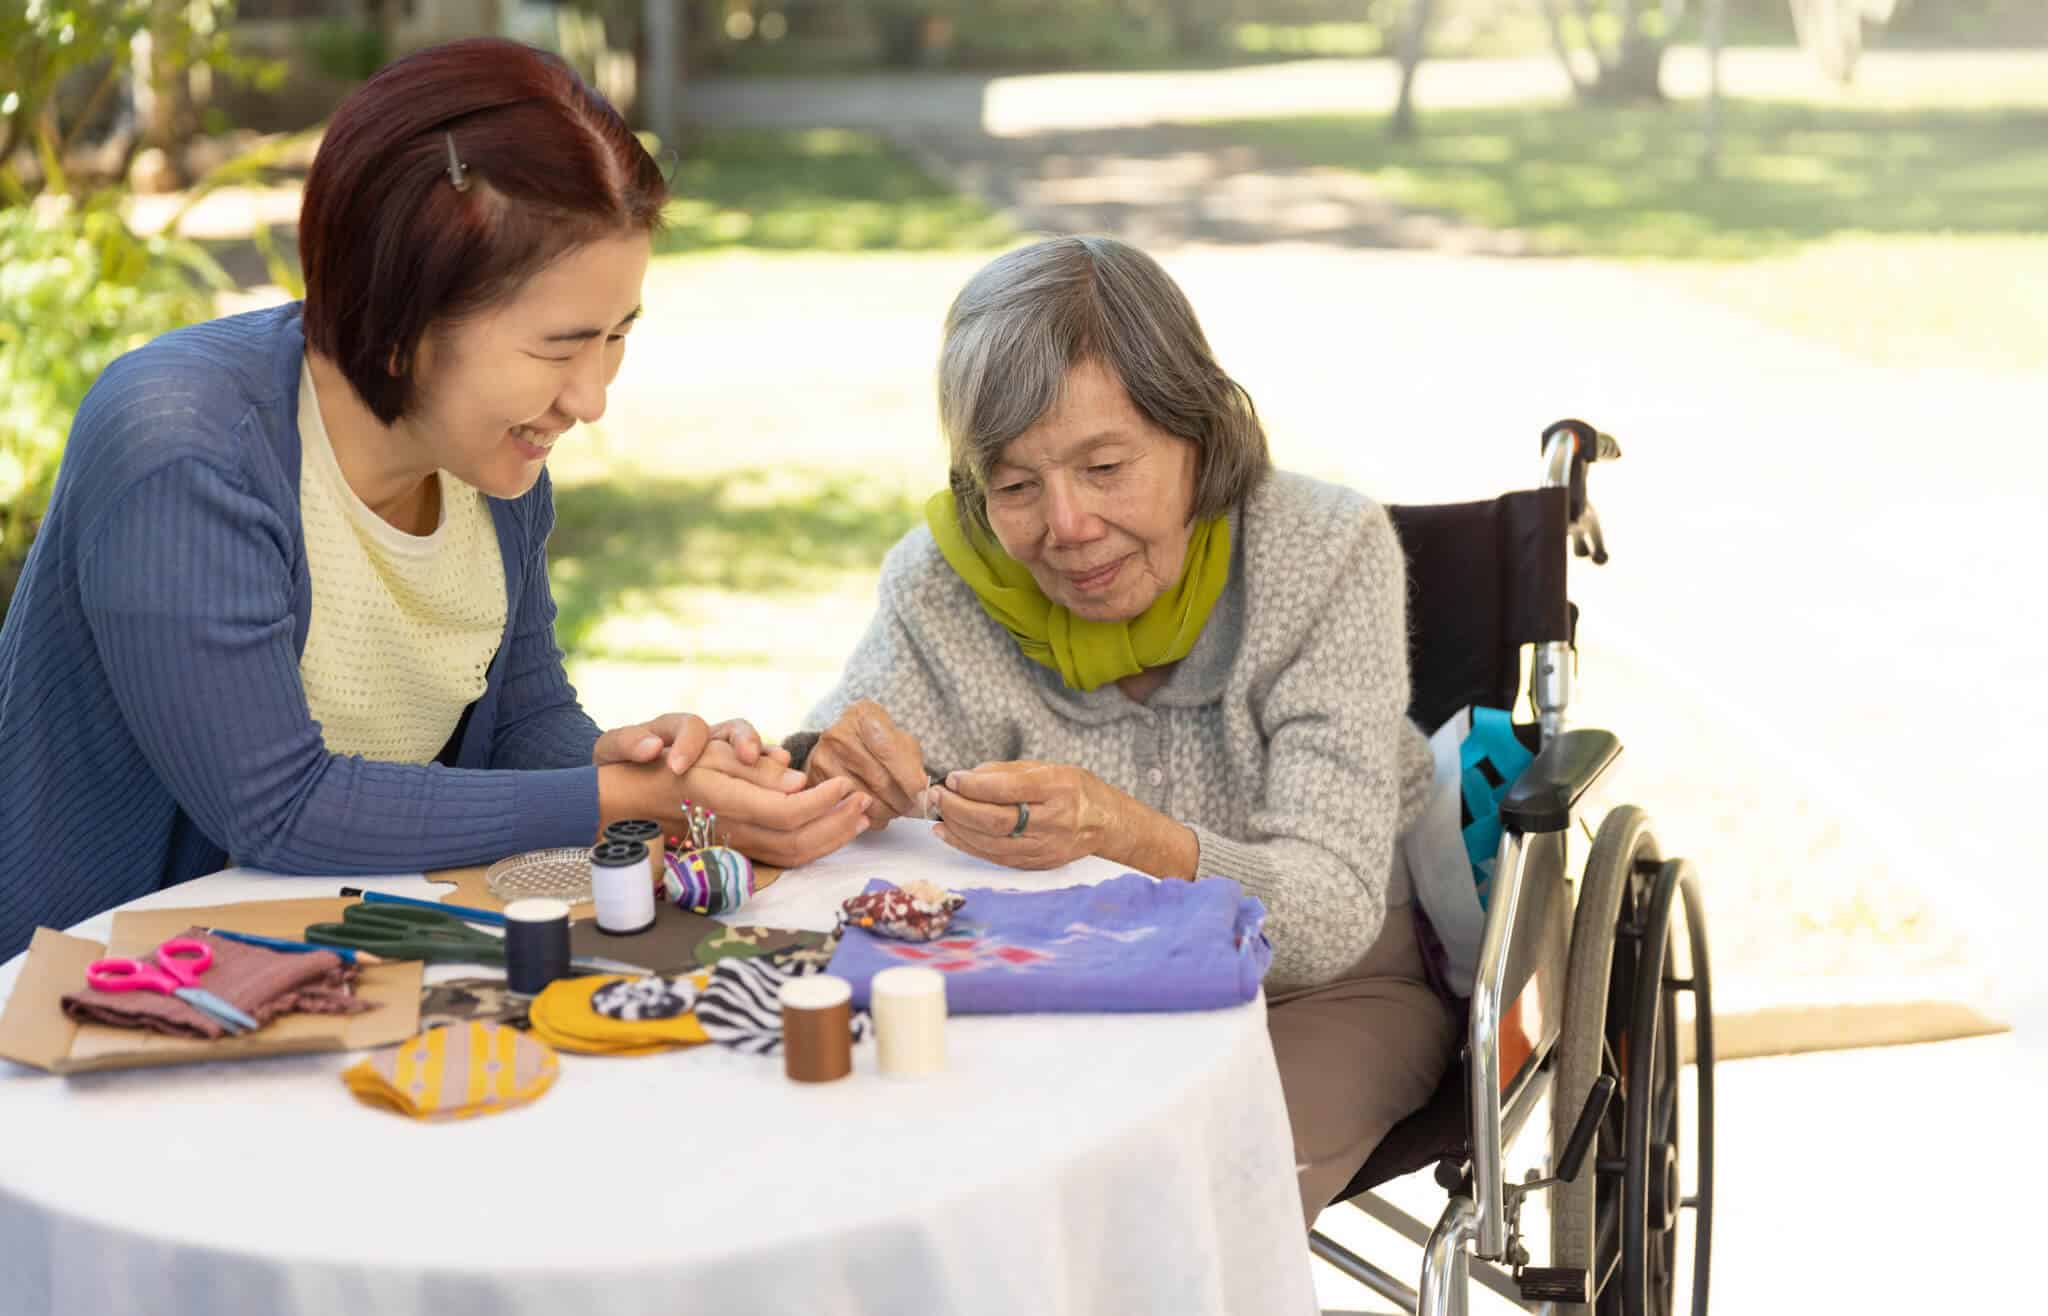 Senior participates in needle work during a social event